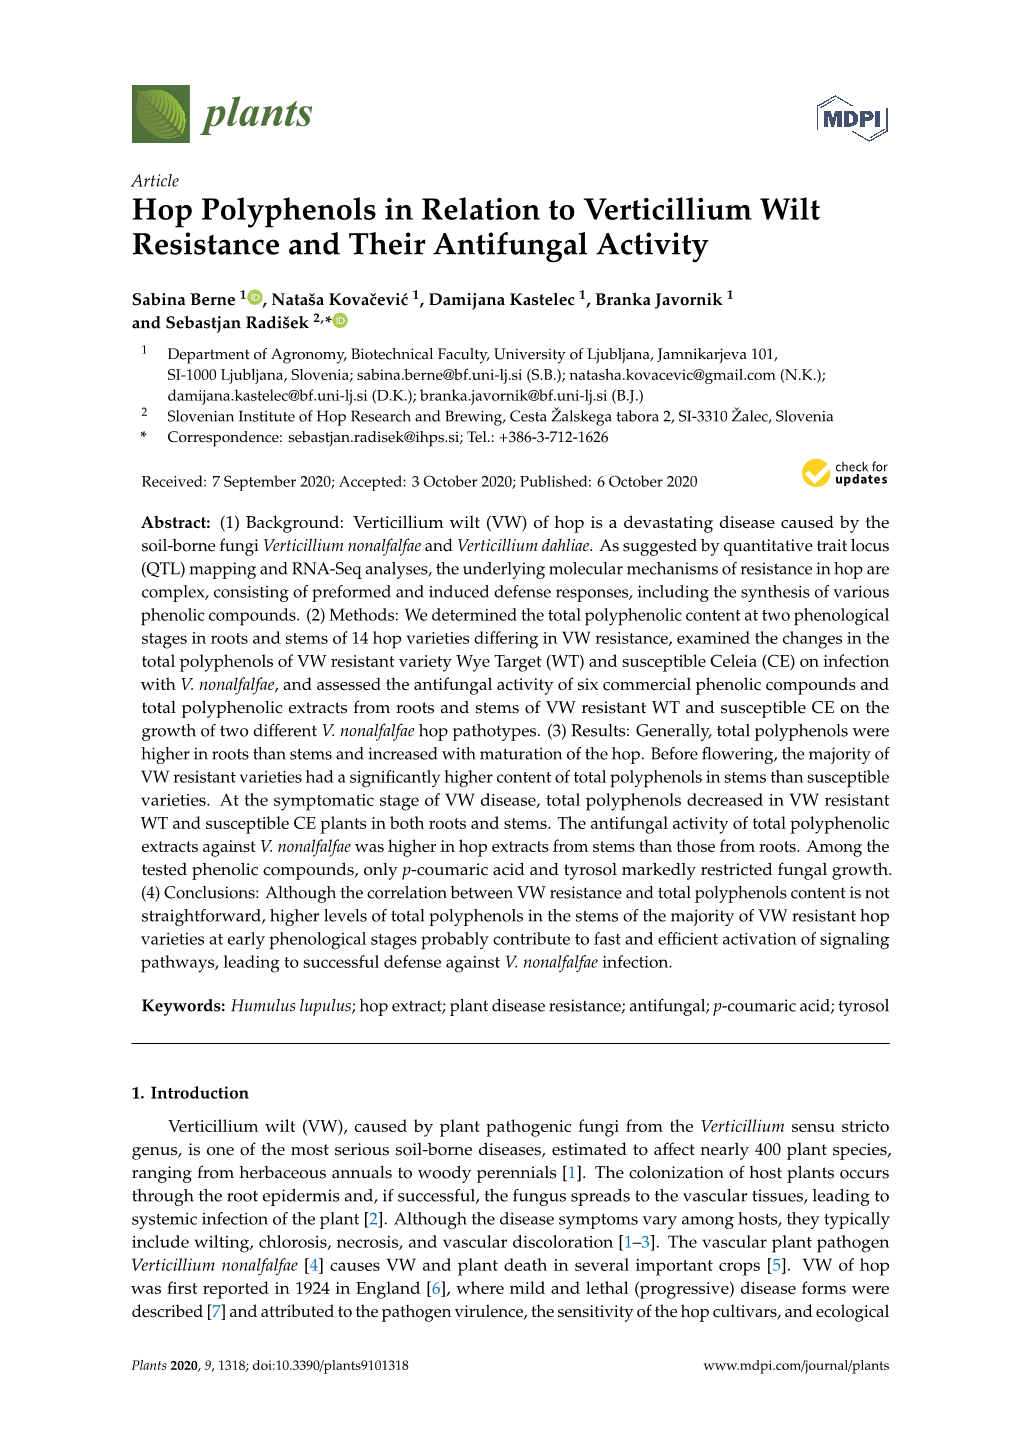 Hop Polyphenols in Relation to Verticillium Wilt Resistance and Their Antifungal Activity